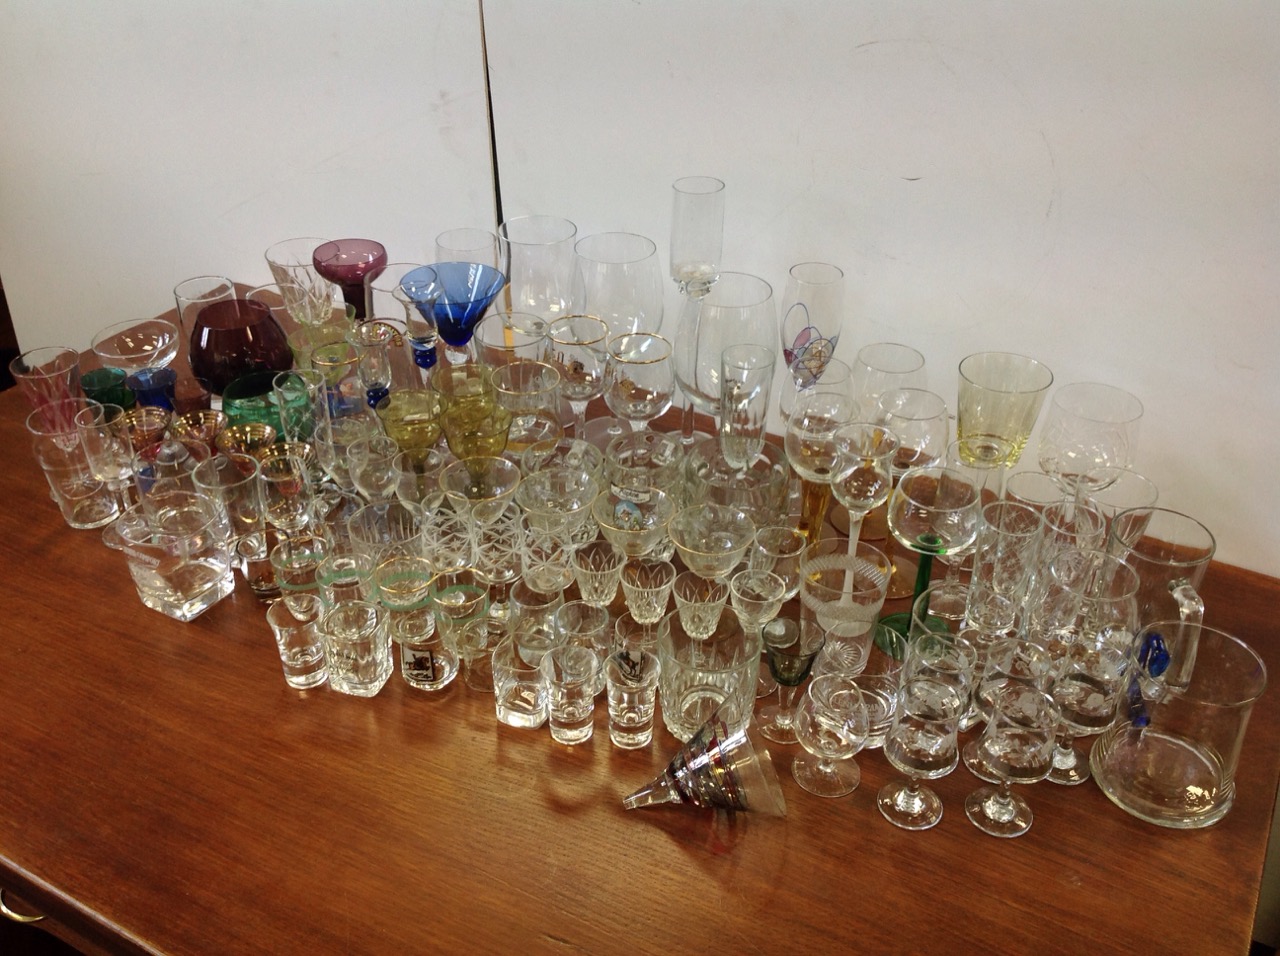 A quantity of drinking glasses - tumblers, wine glasses, tots, tankards, some sets, coloured, art